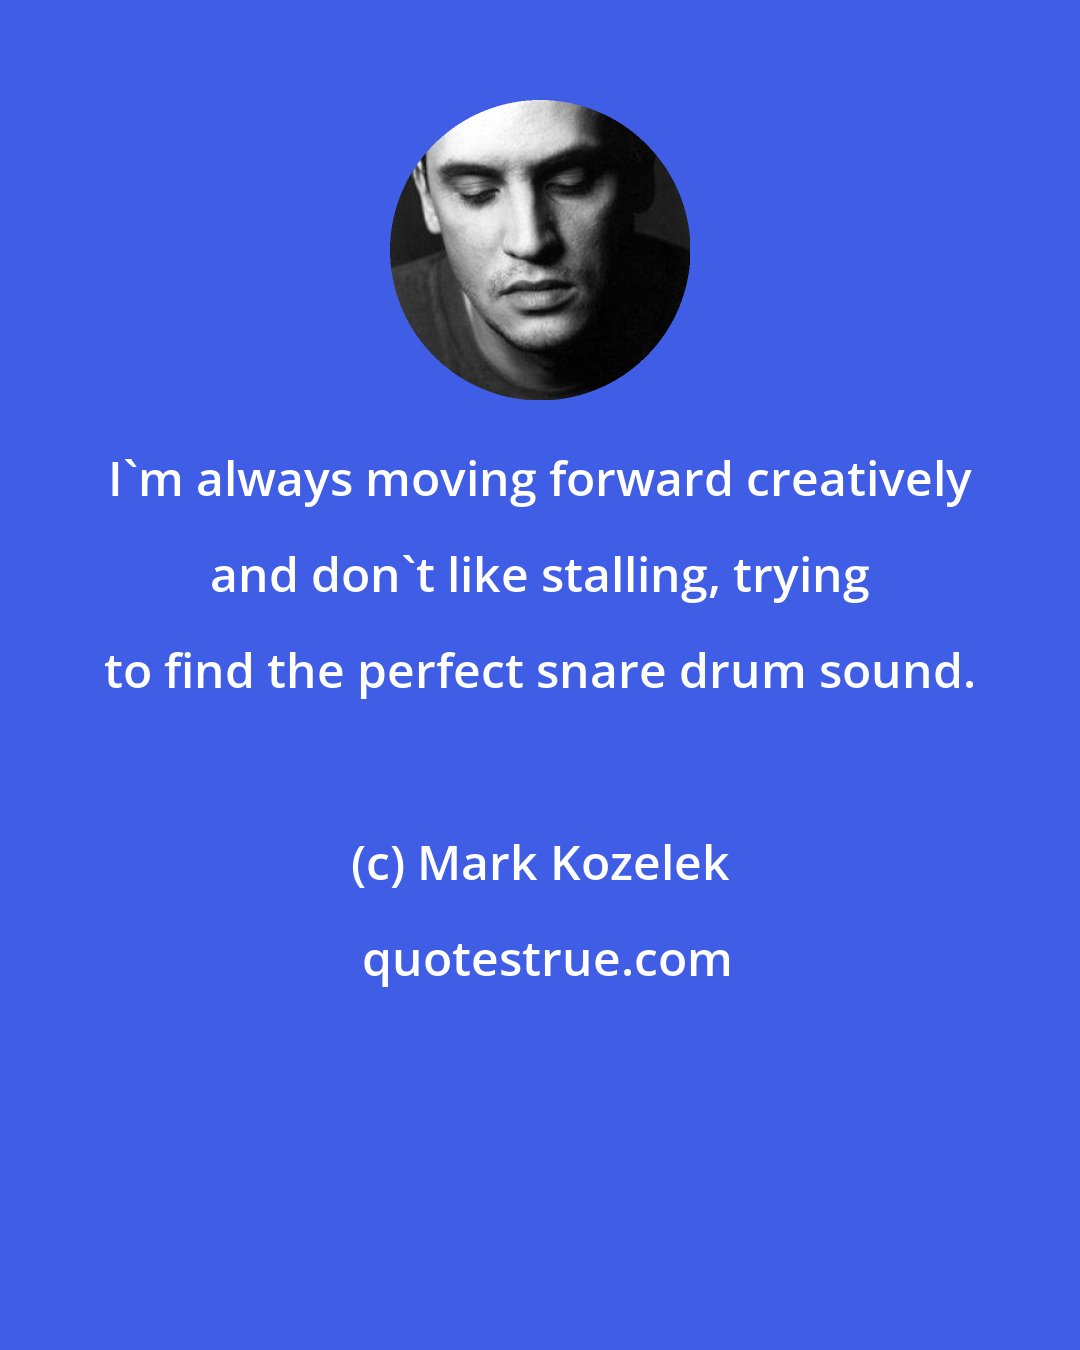 Mark Kozelek: I'm always moving forward creatively and don't like stalling, trying to find the perfect snare drum sound.